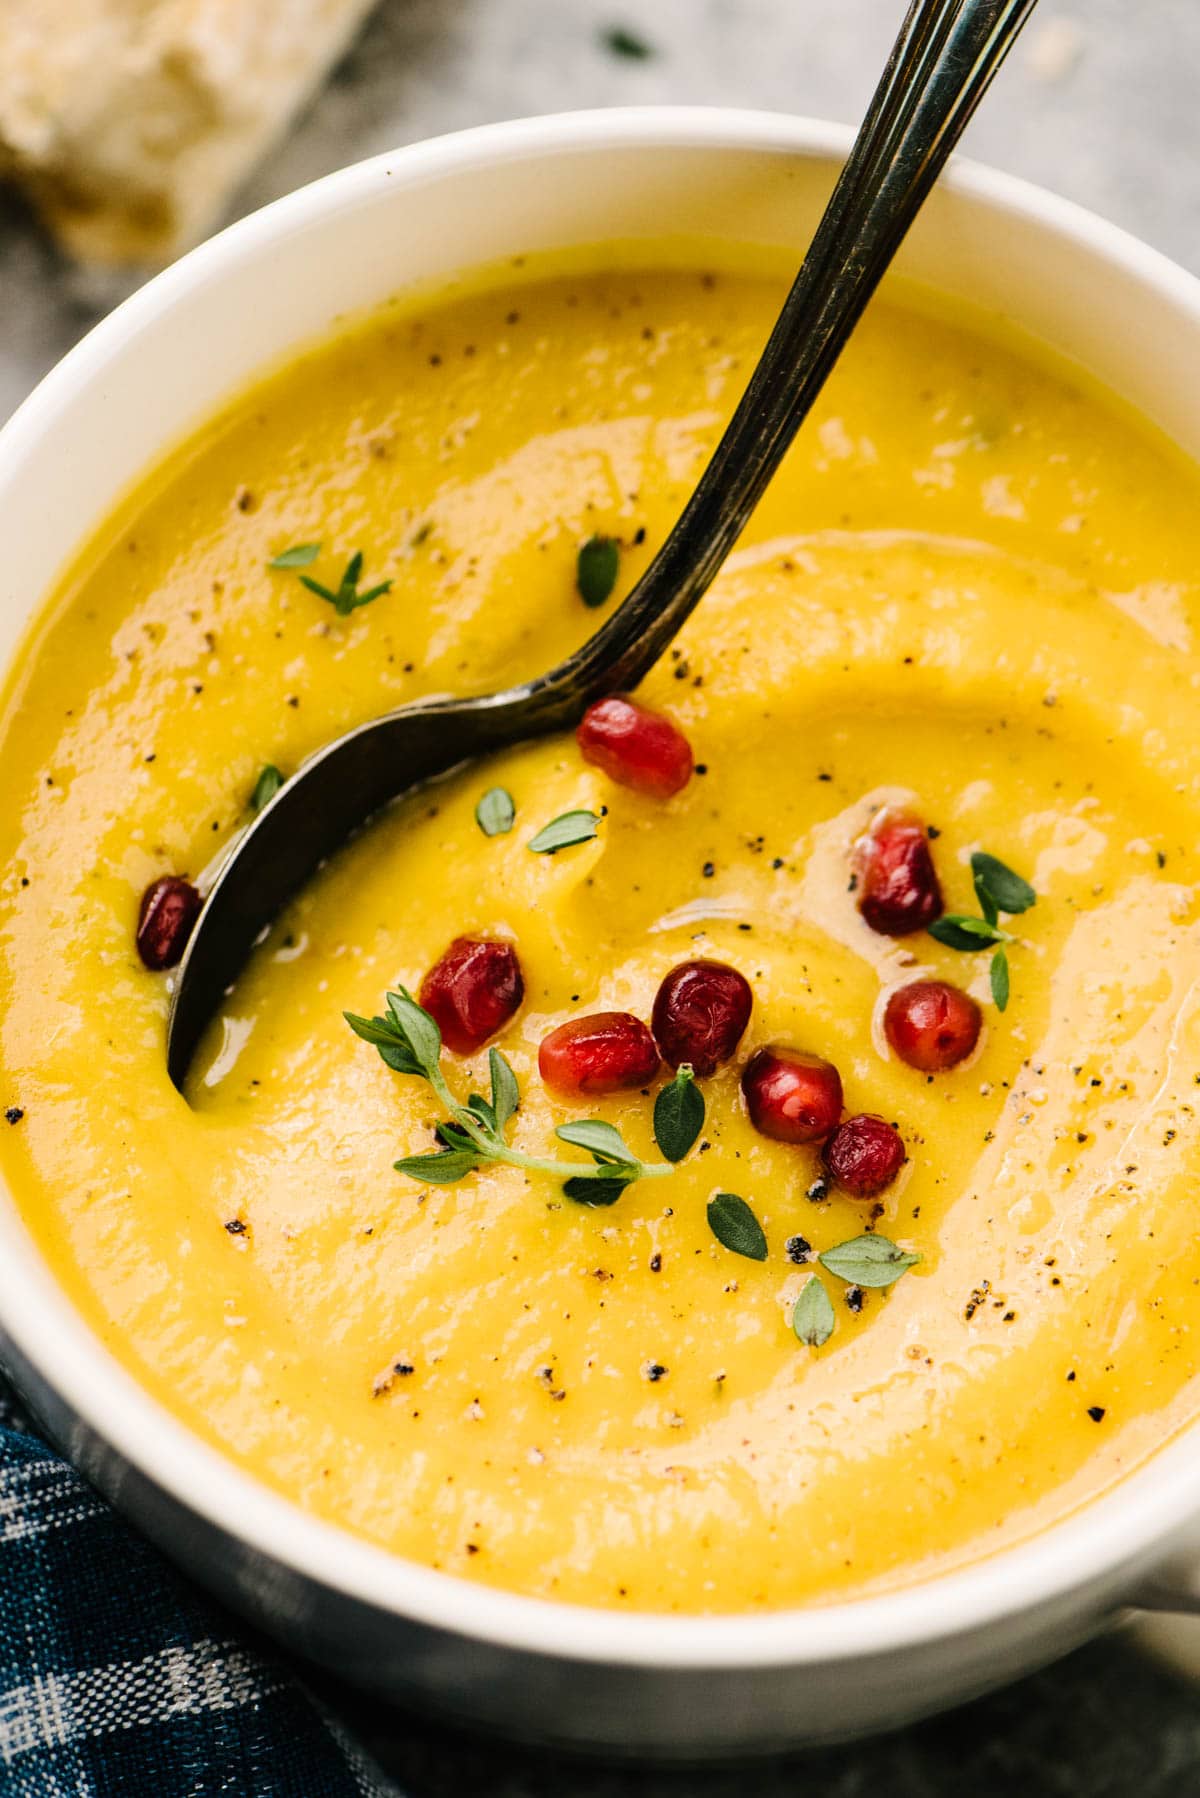 Side view, a soup spoon tucked into a bowl of roasted butternut squash soup garnished with pomegranate seeds and fresh thyme leaves.